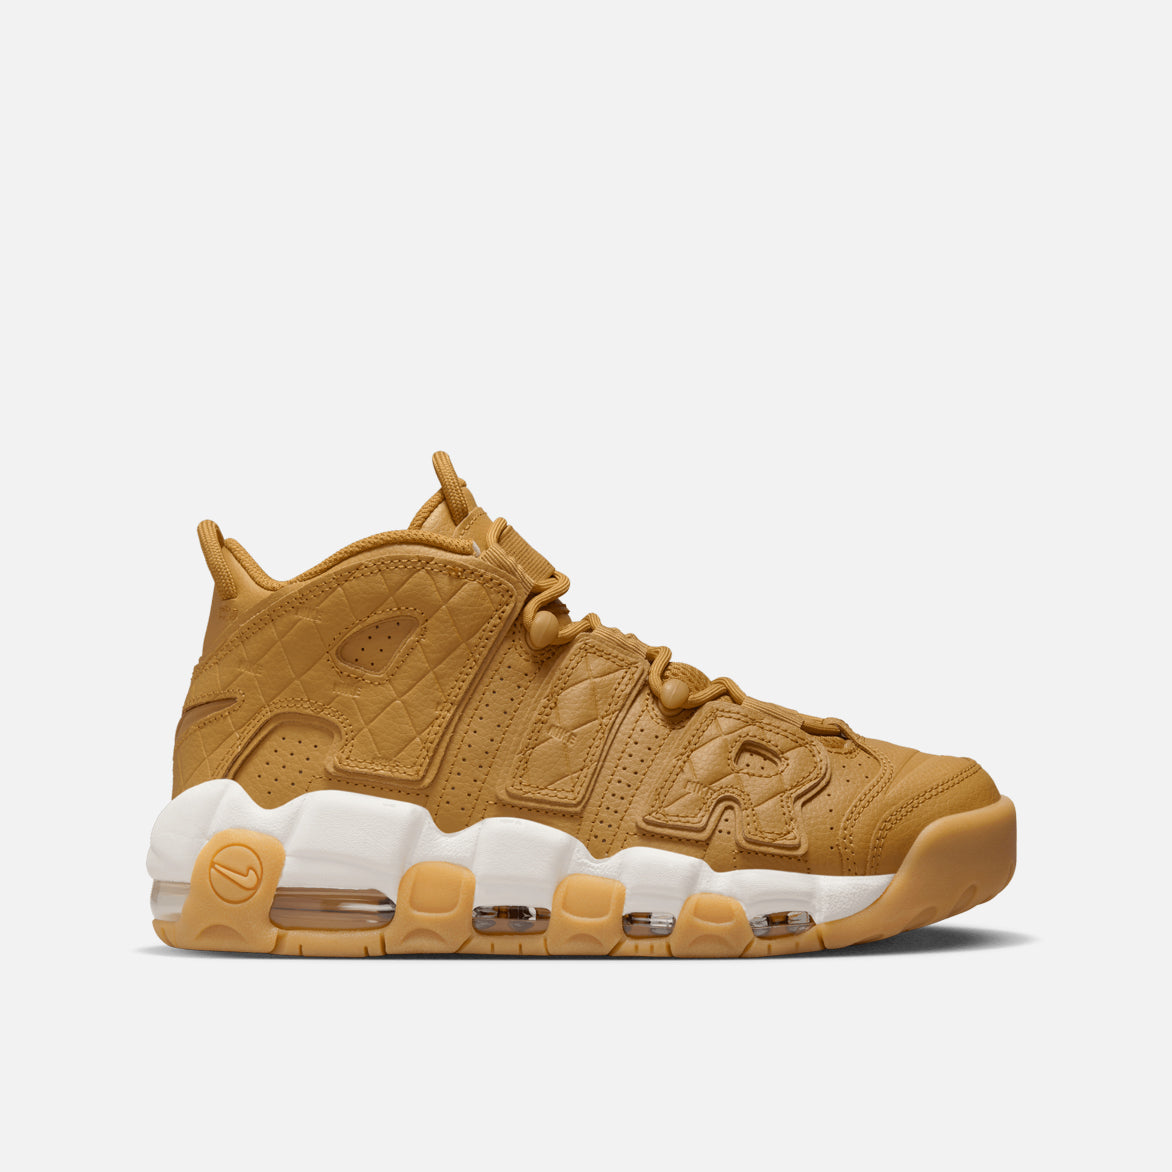 WMNS AIR MORE UPTEMPO '96 "QUILTED WHEAT"